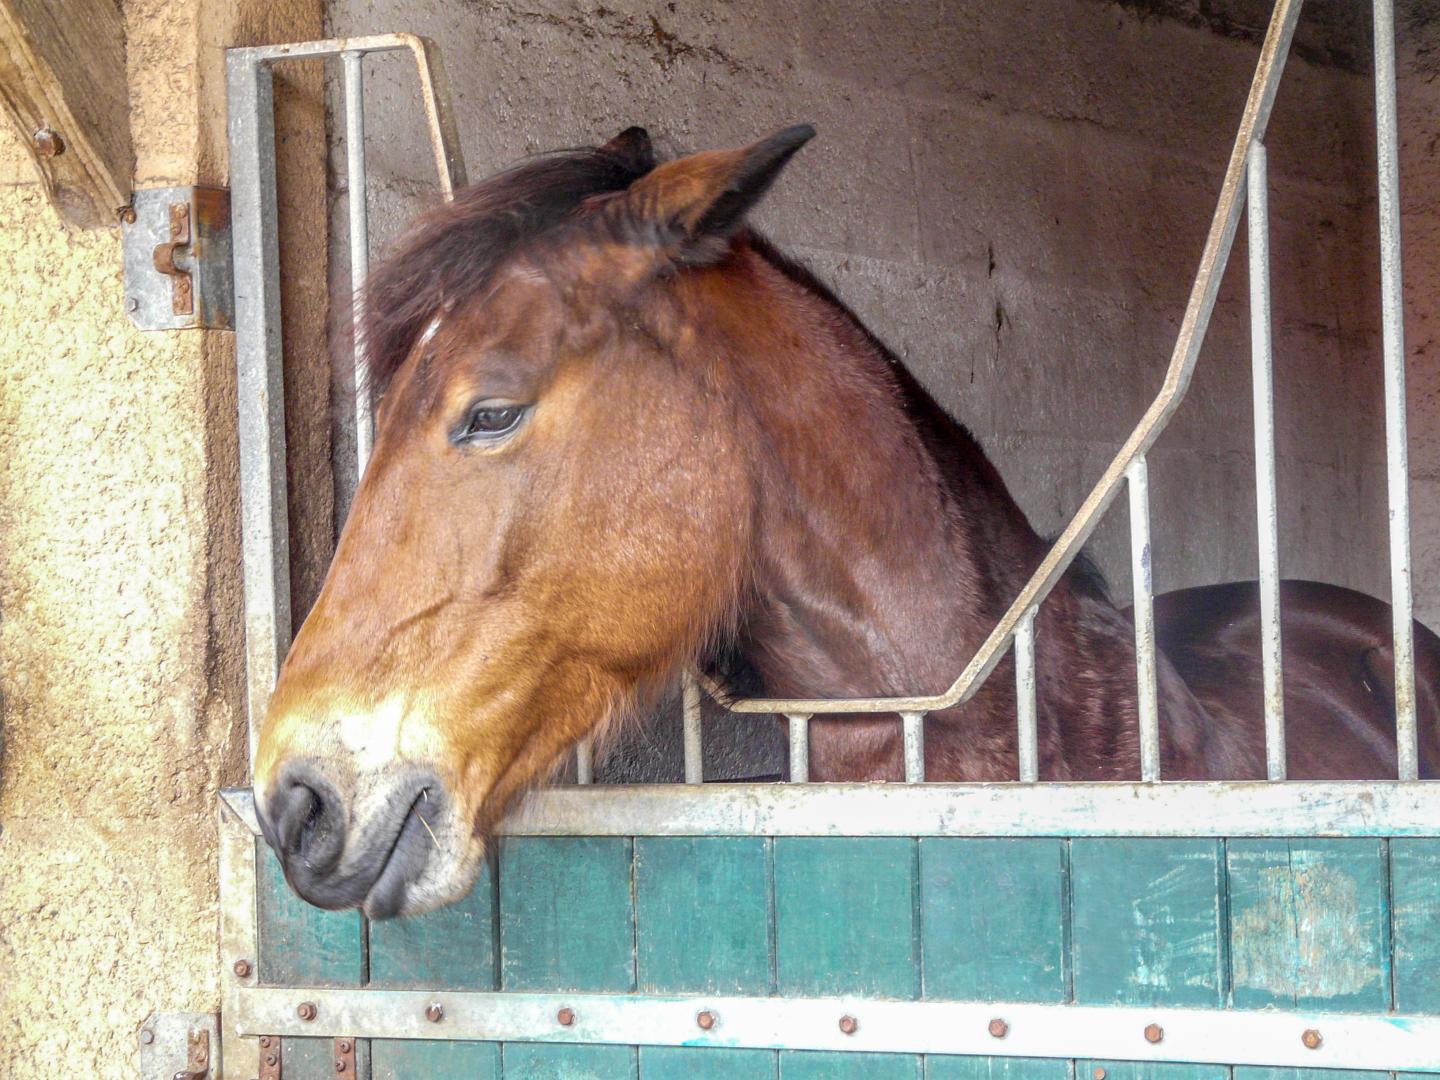 Horse with Ears Pointing Back, a Potential Sign of Compromised Welfare